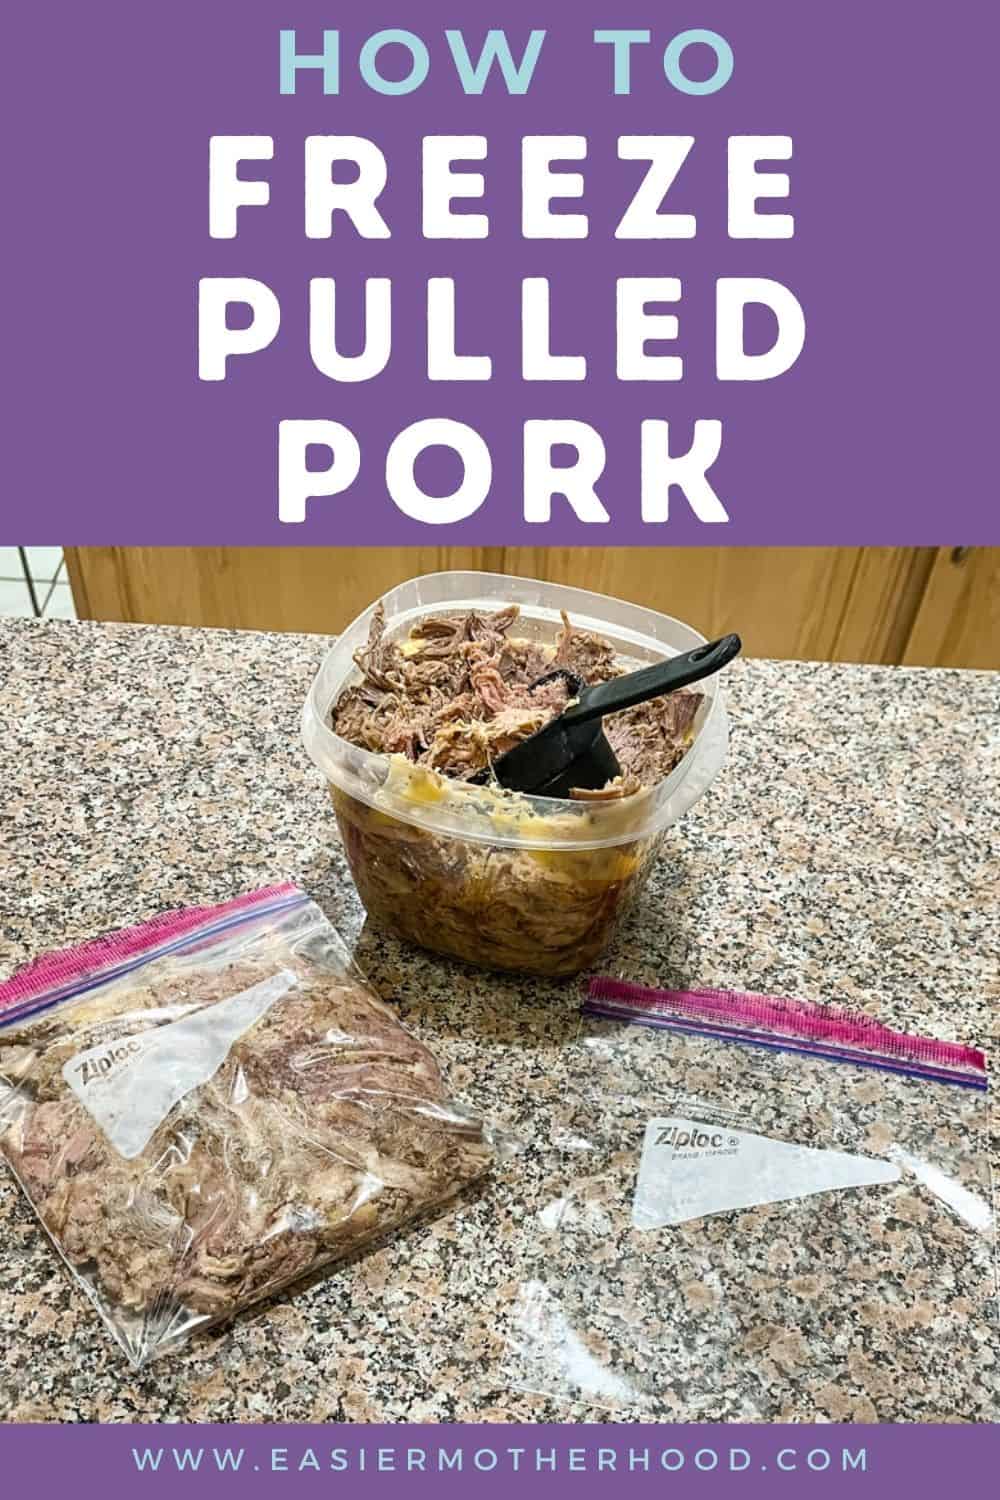 Pin with pork, ziploc, and measuring cup on a counter. Text reads "how to freeze pulled pork".